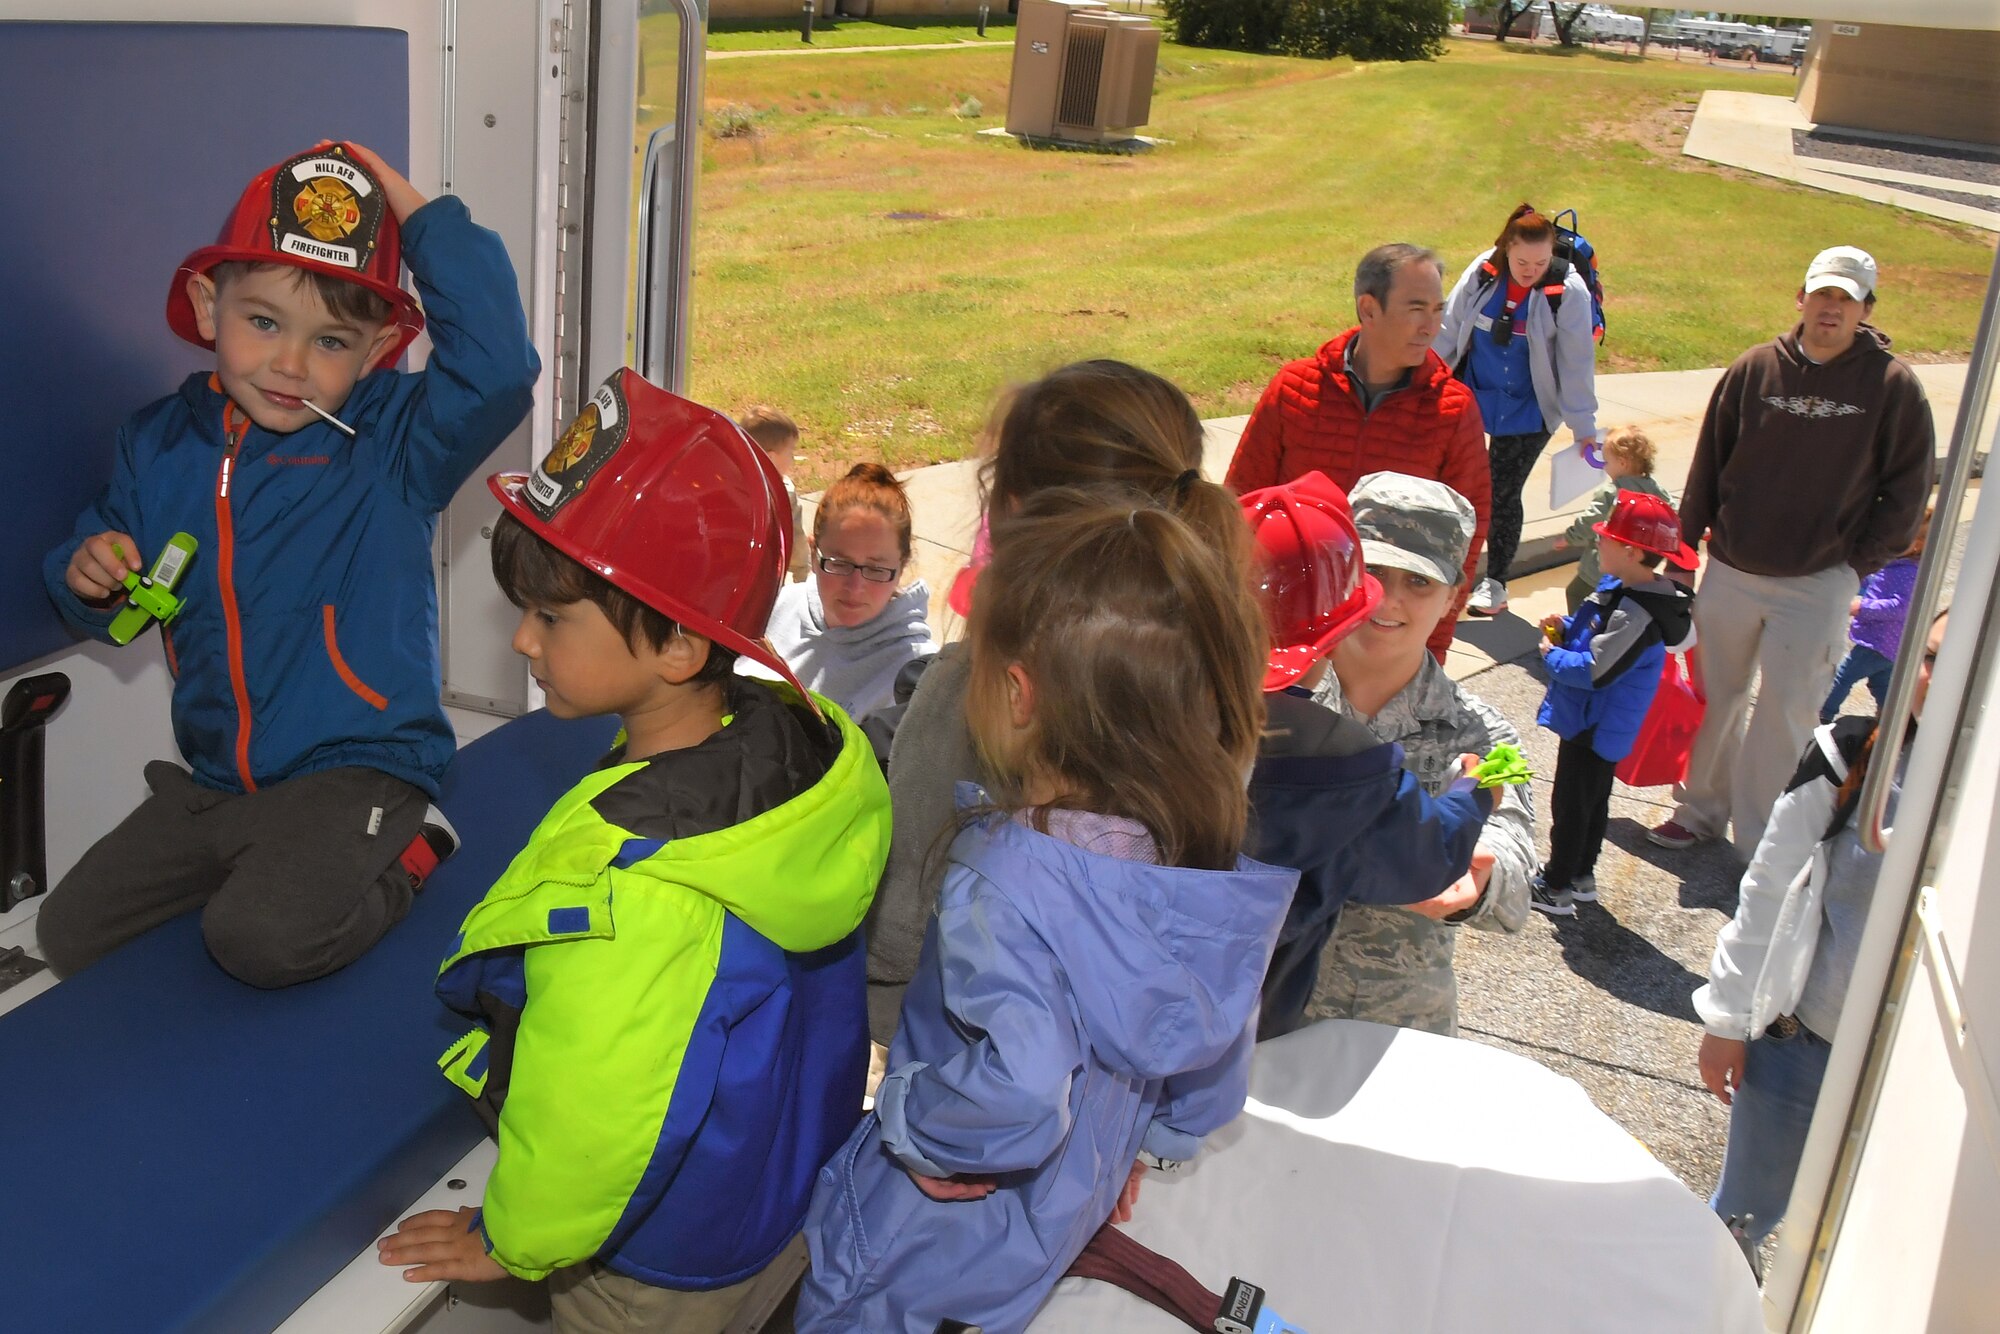 Children get a chance to see the inside of an Ambulance, with the help of Tech Sgt. Jessica Flynn, 75th Medical Group at the Wheels of Wonder event, May 17, 2019, Hill Air Force Base, Utah. (U.S. Air Force photo by Todd Cromar)